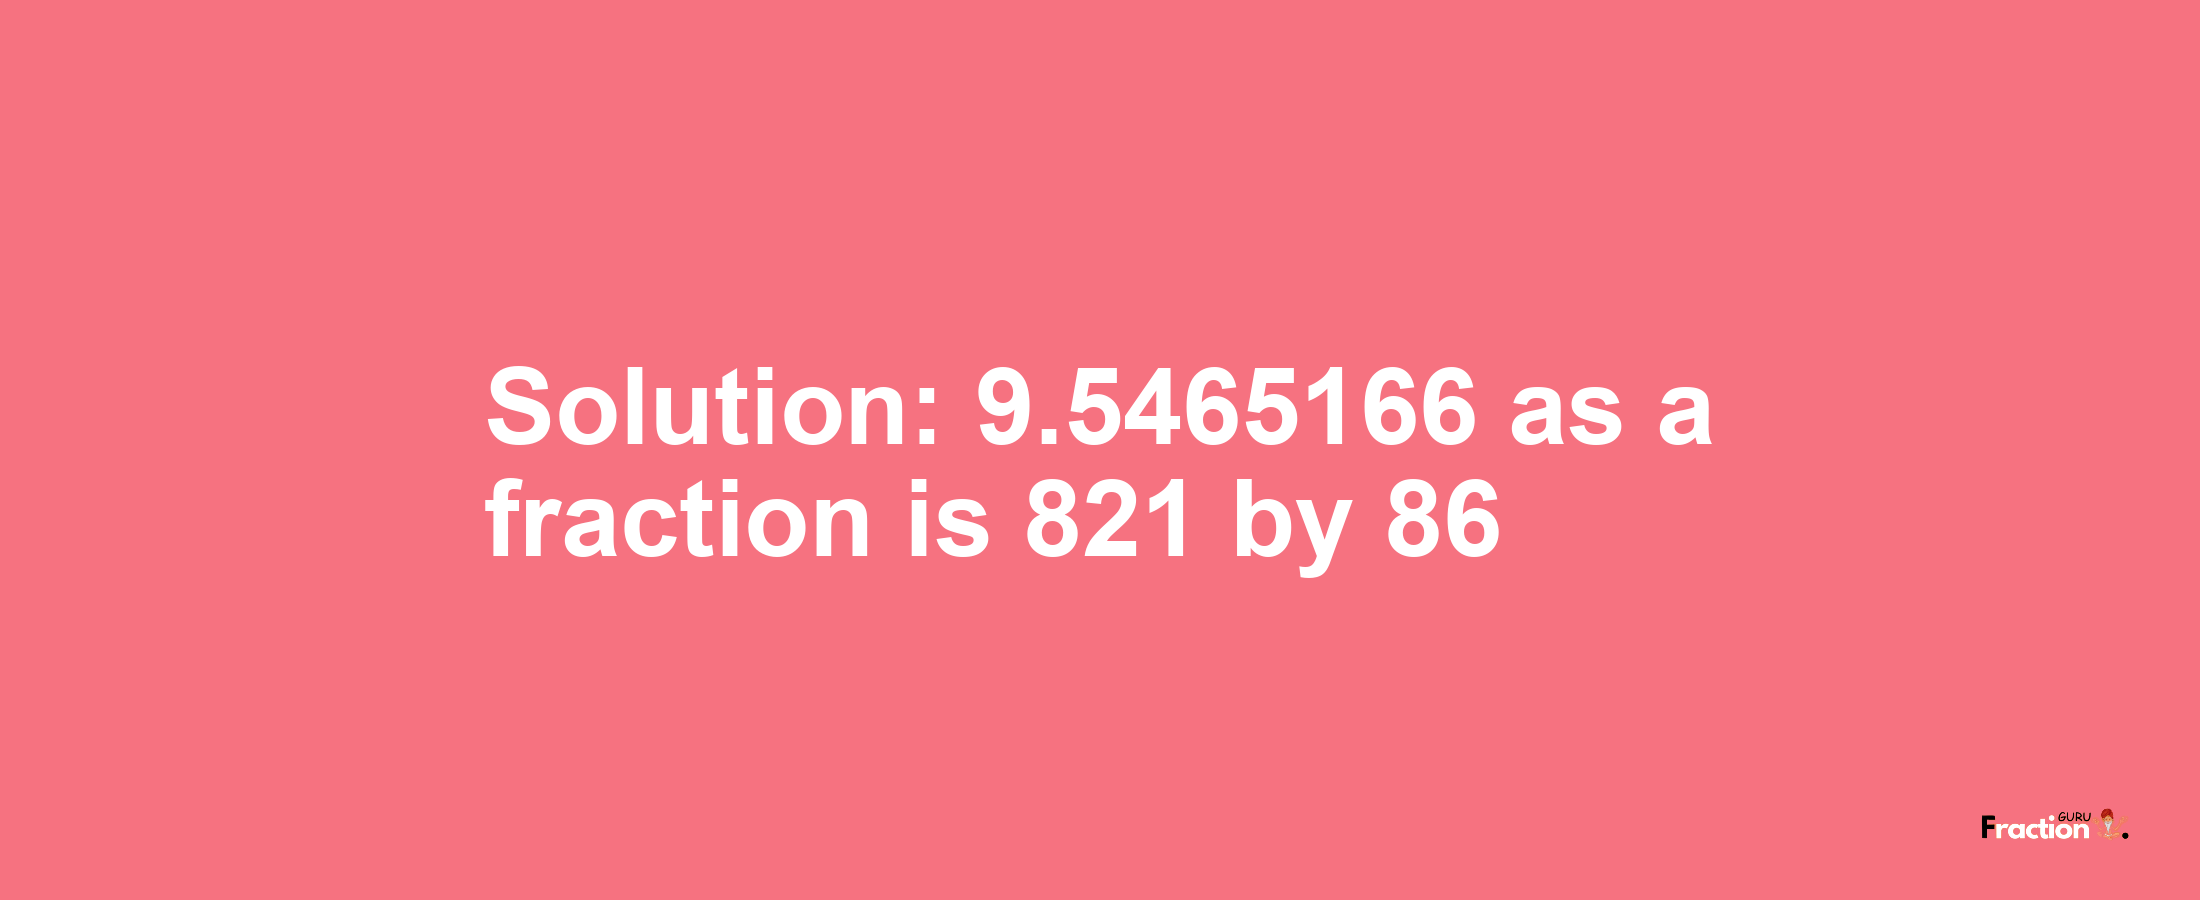 Solution:9.5465166 as a fraction is 821/86